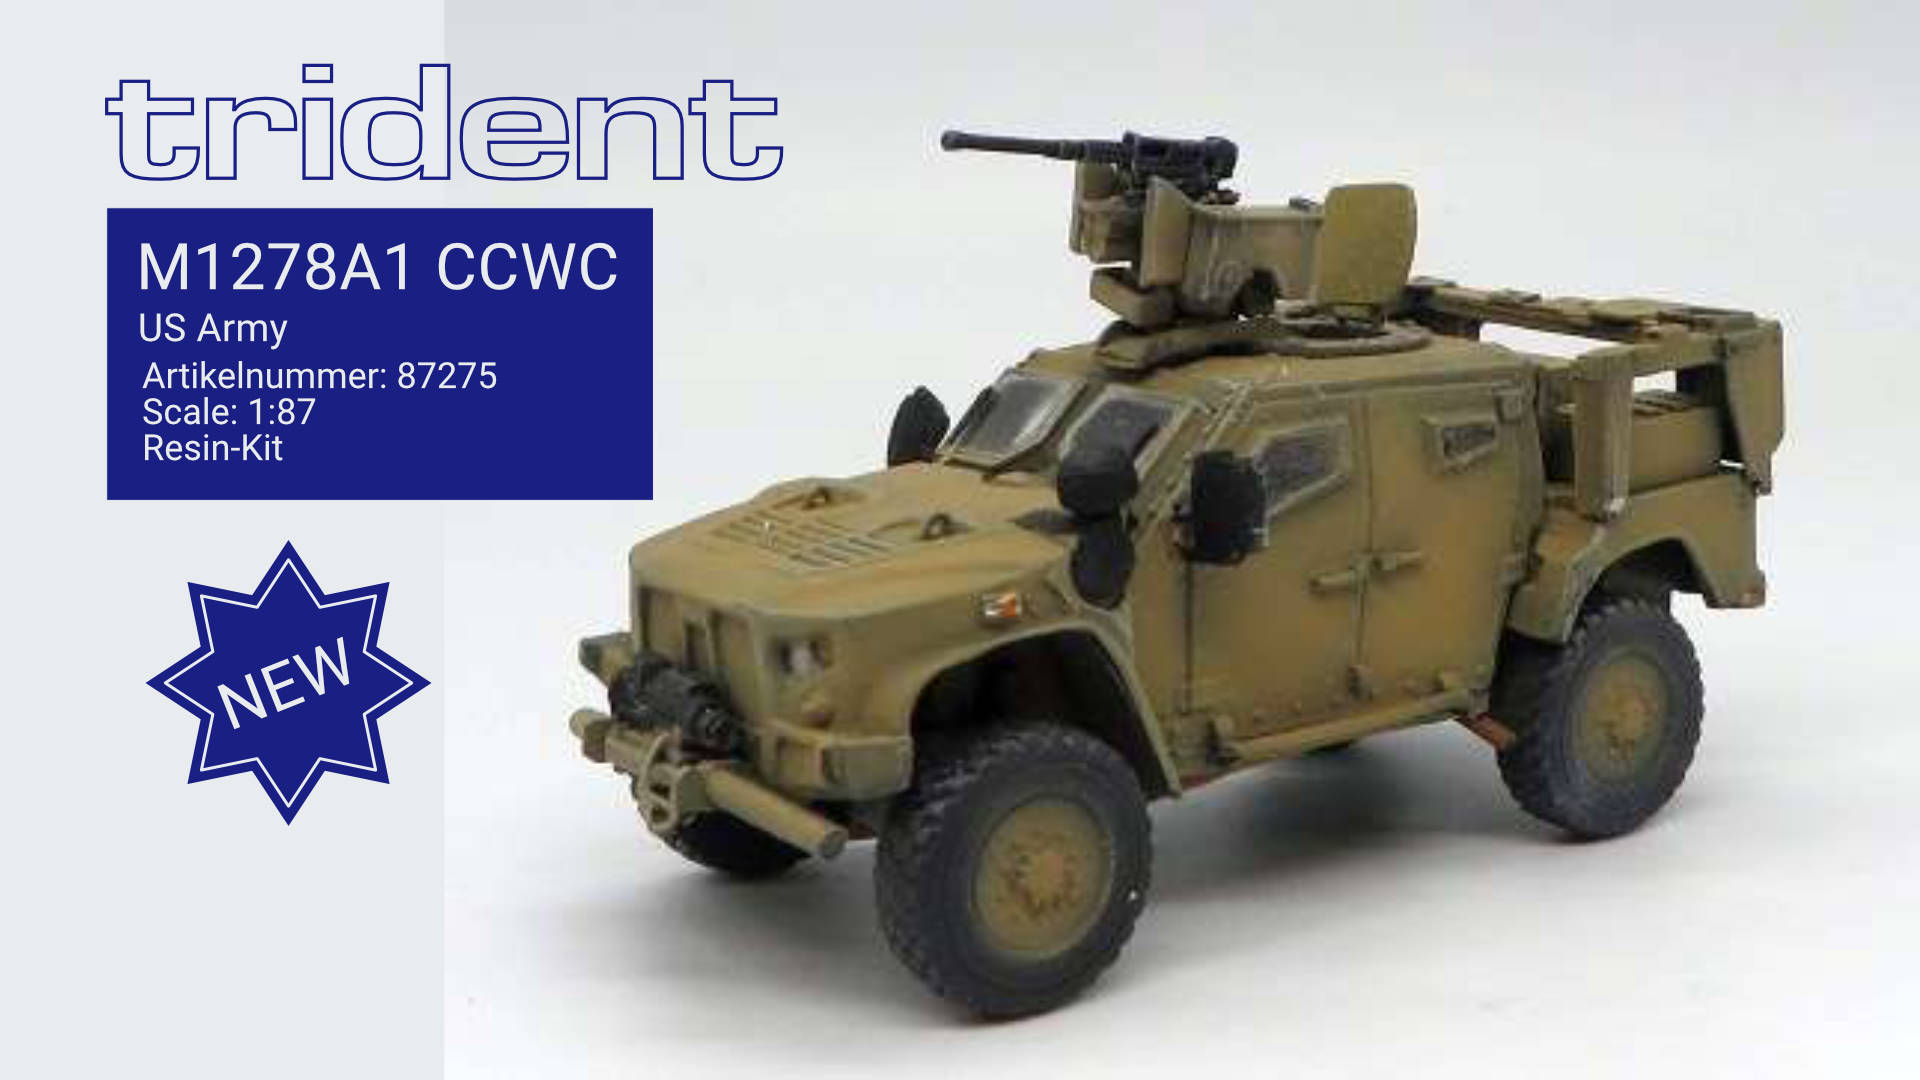 New models of US Marines and Special Forces vehicles